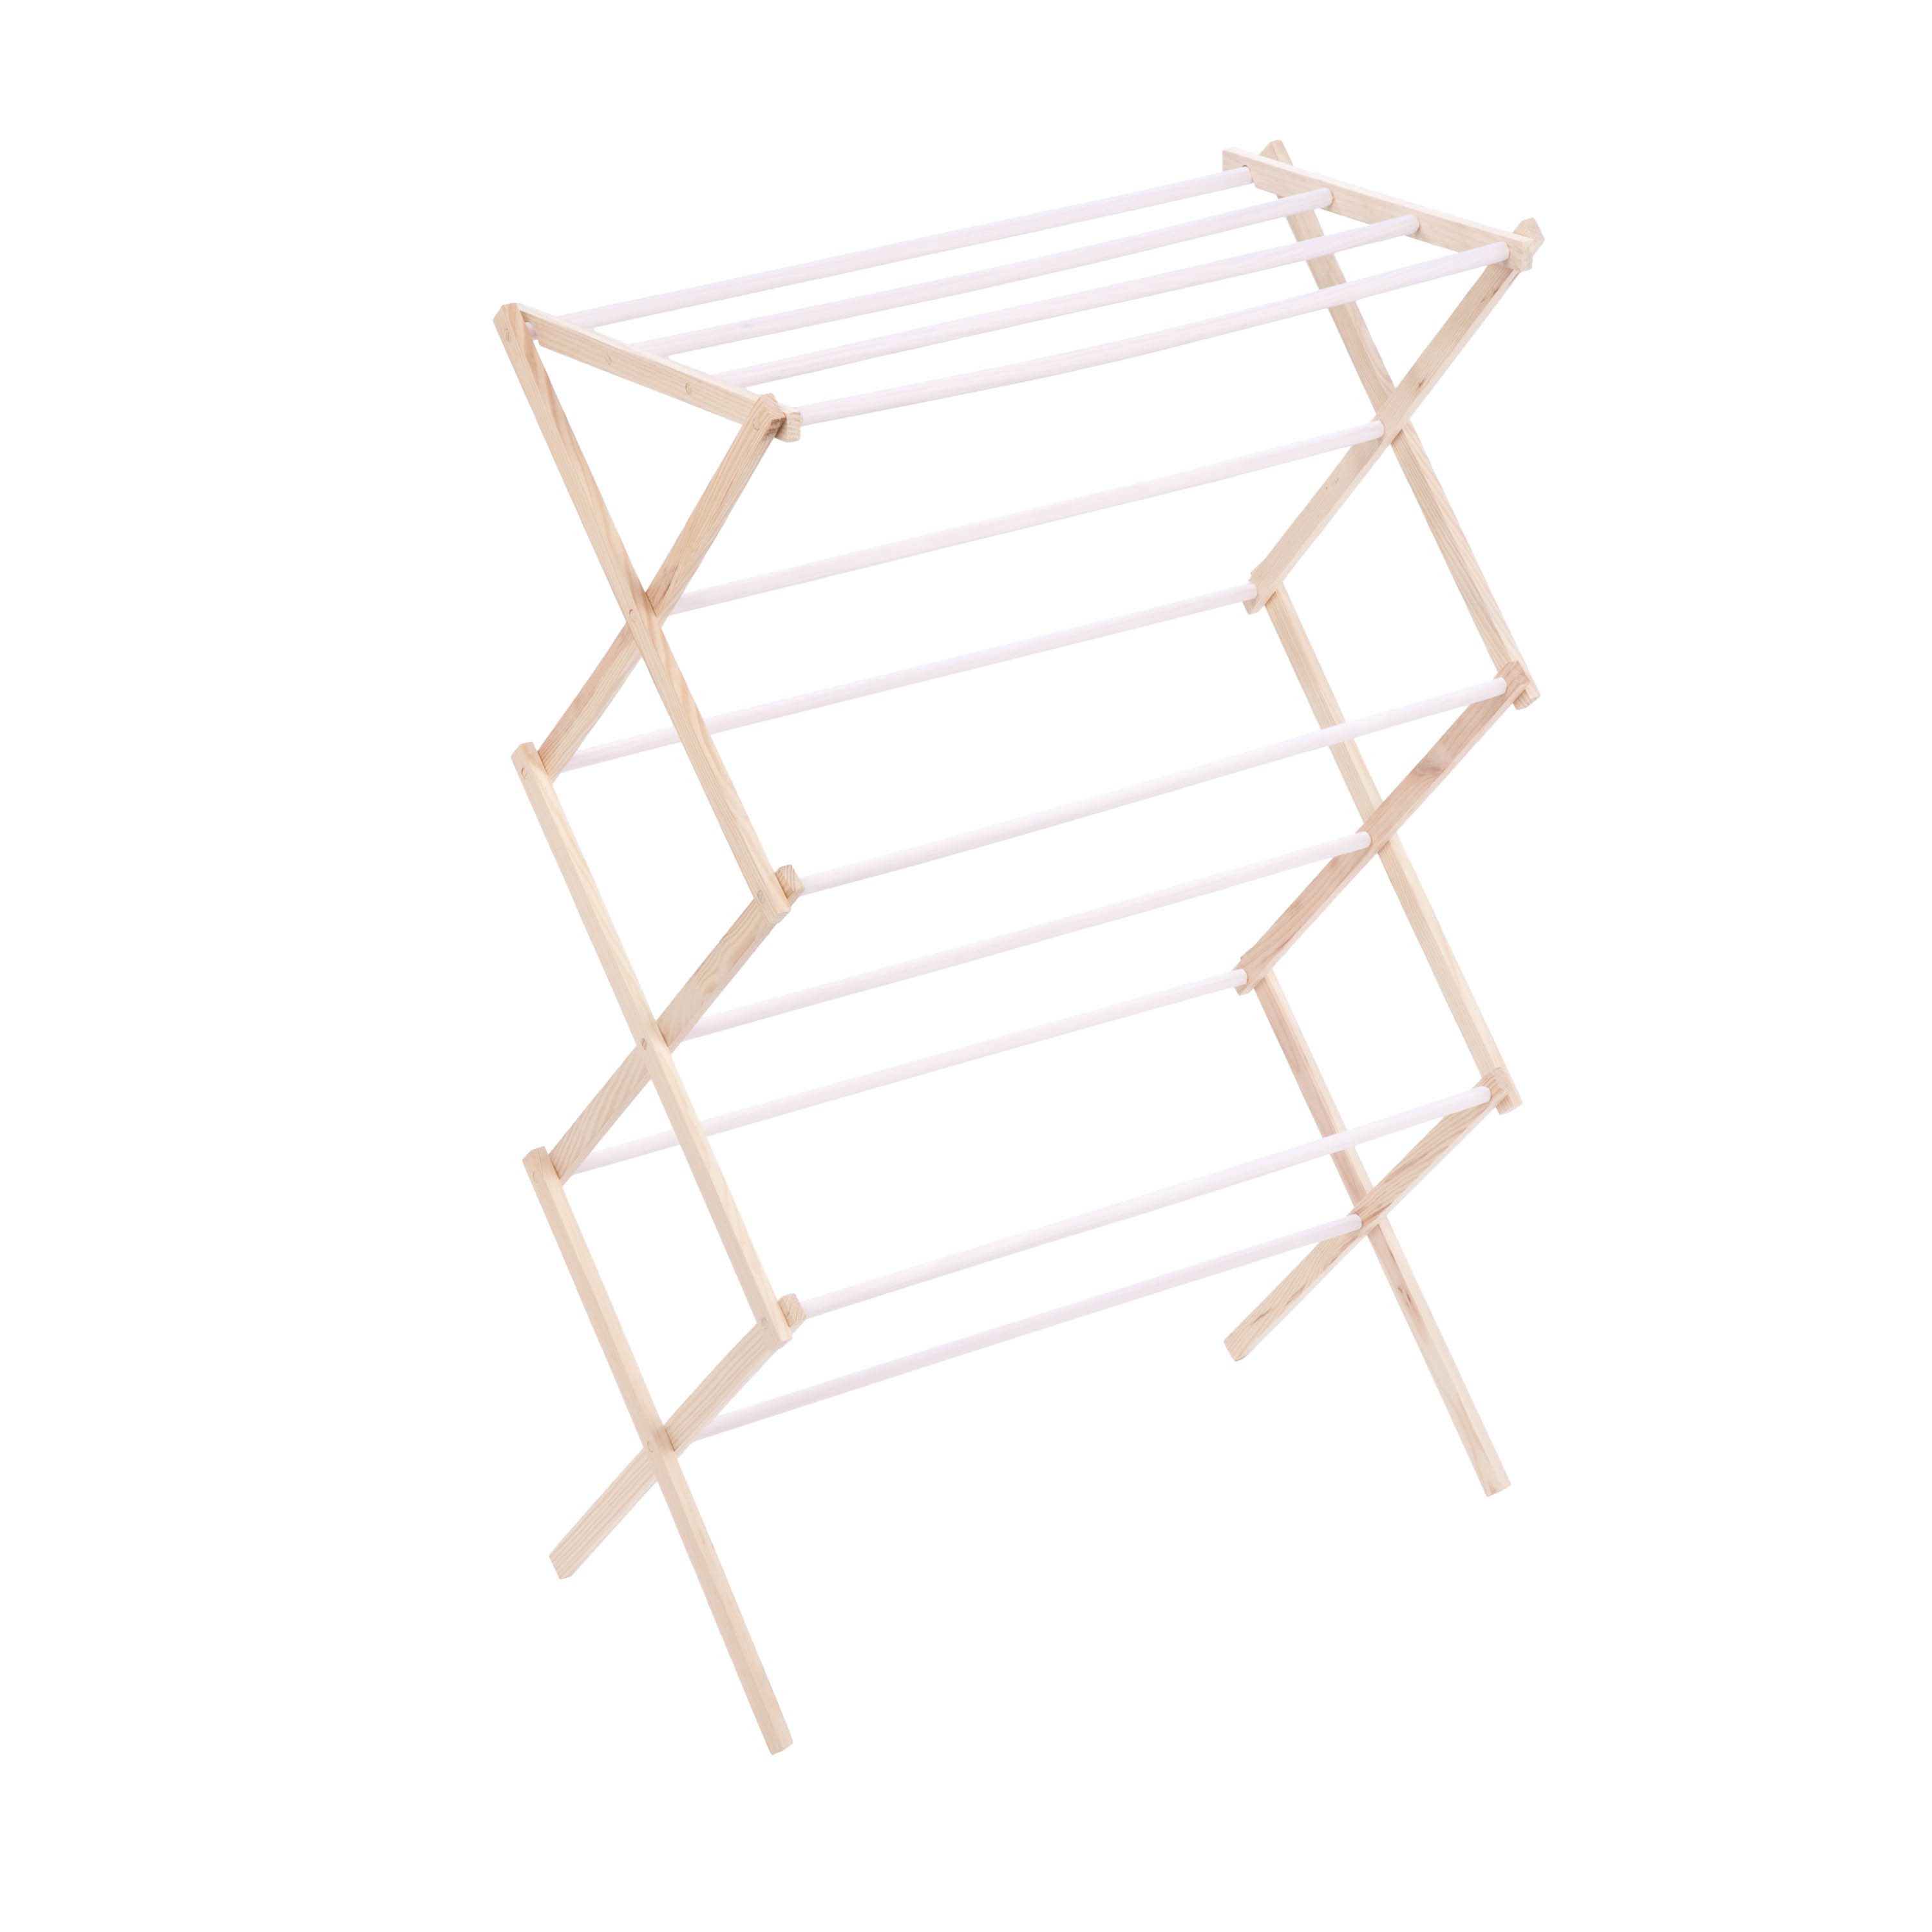 Honey Can Do Collapsible Wood Clothes Drying Rack - image 1 of 5